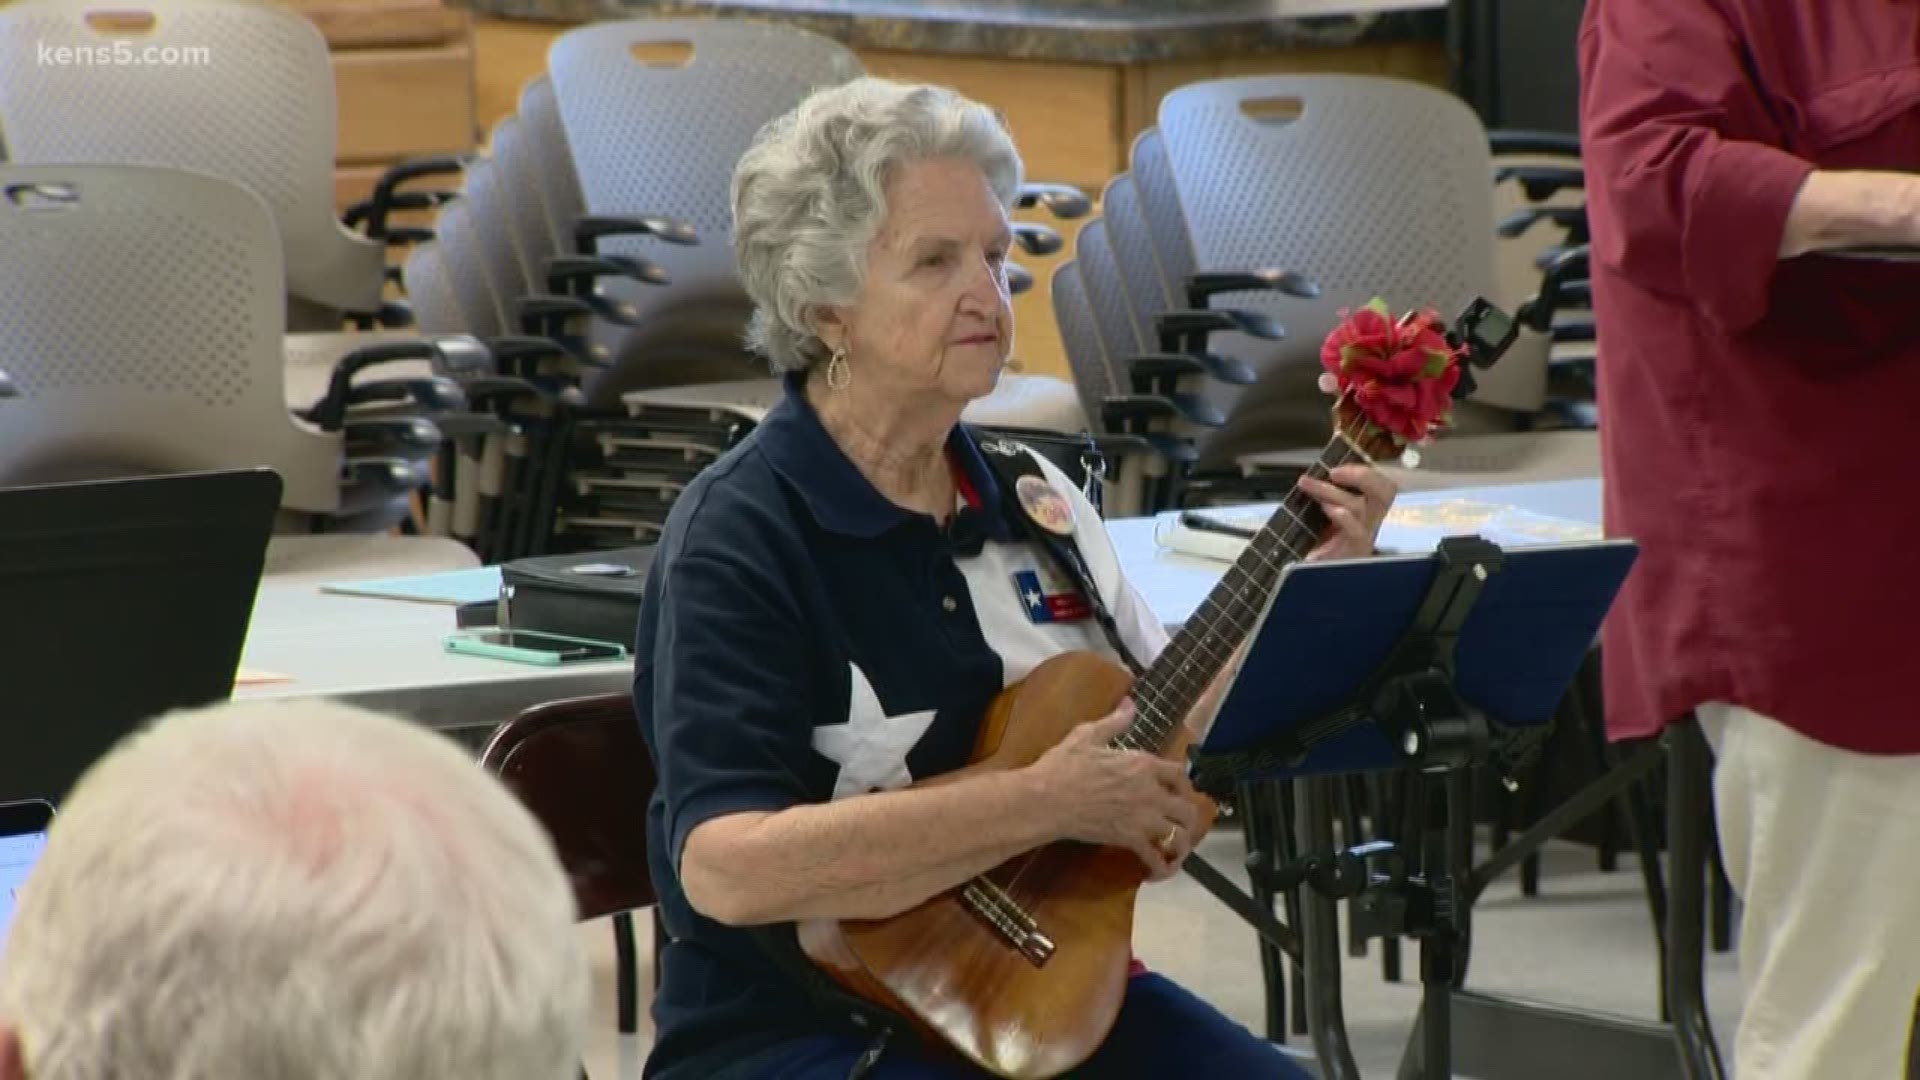 More than 50 years ago, Beverly Gagliari taught herself to play the ukulele. Today, she's still spreading the love to those who want to learn.